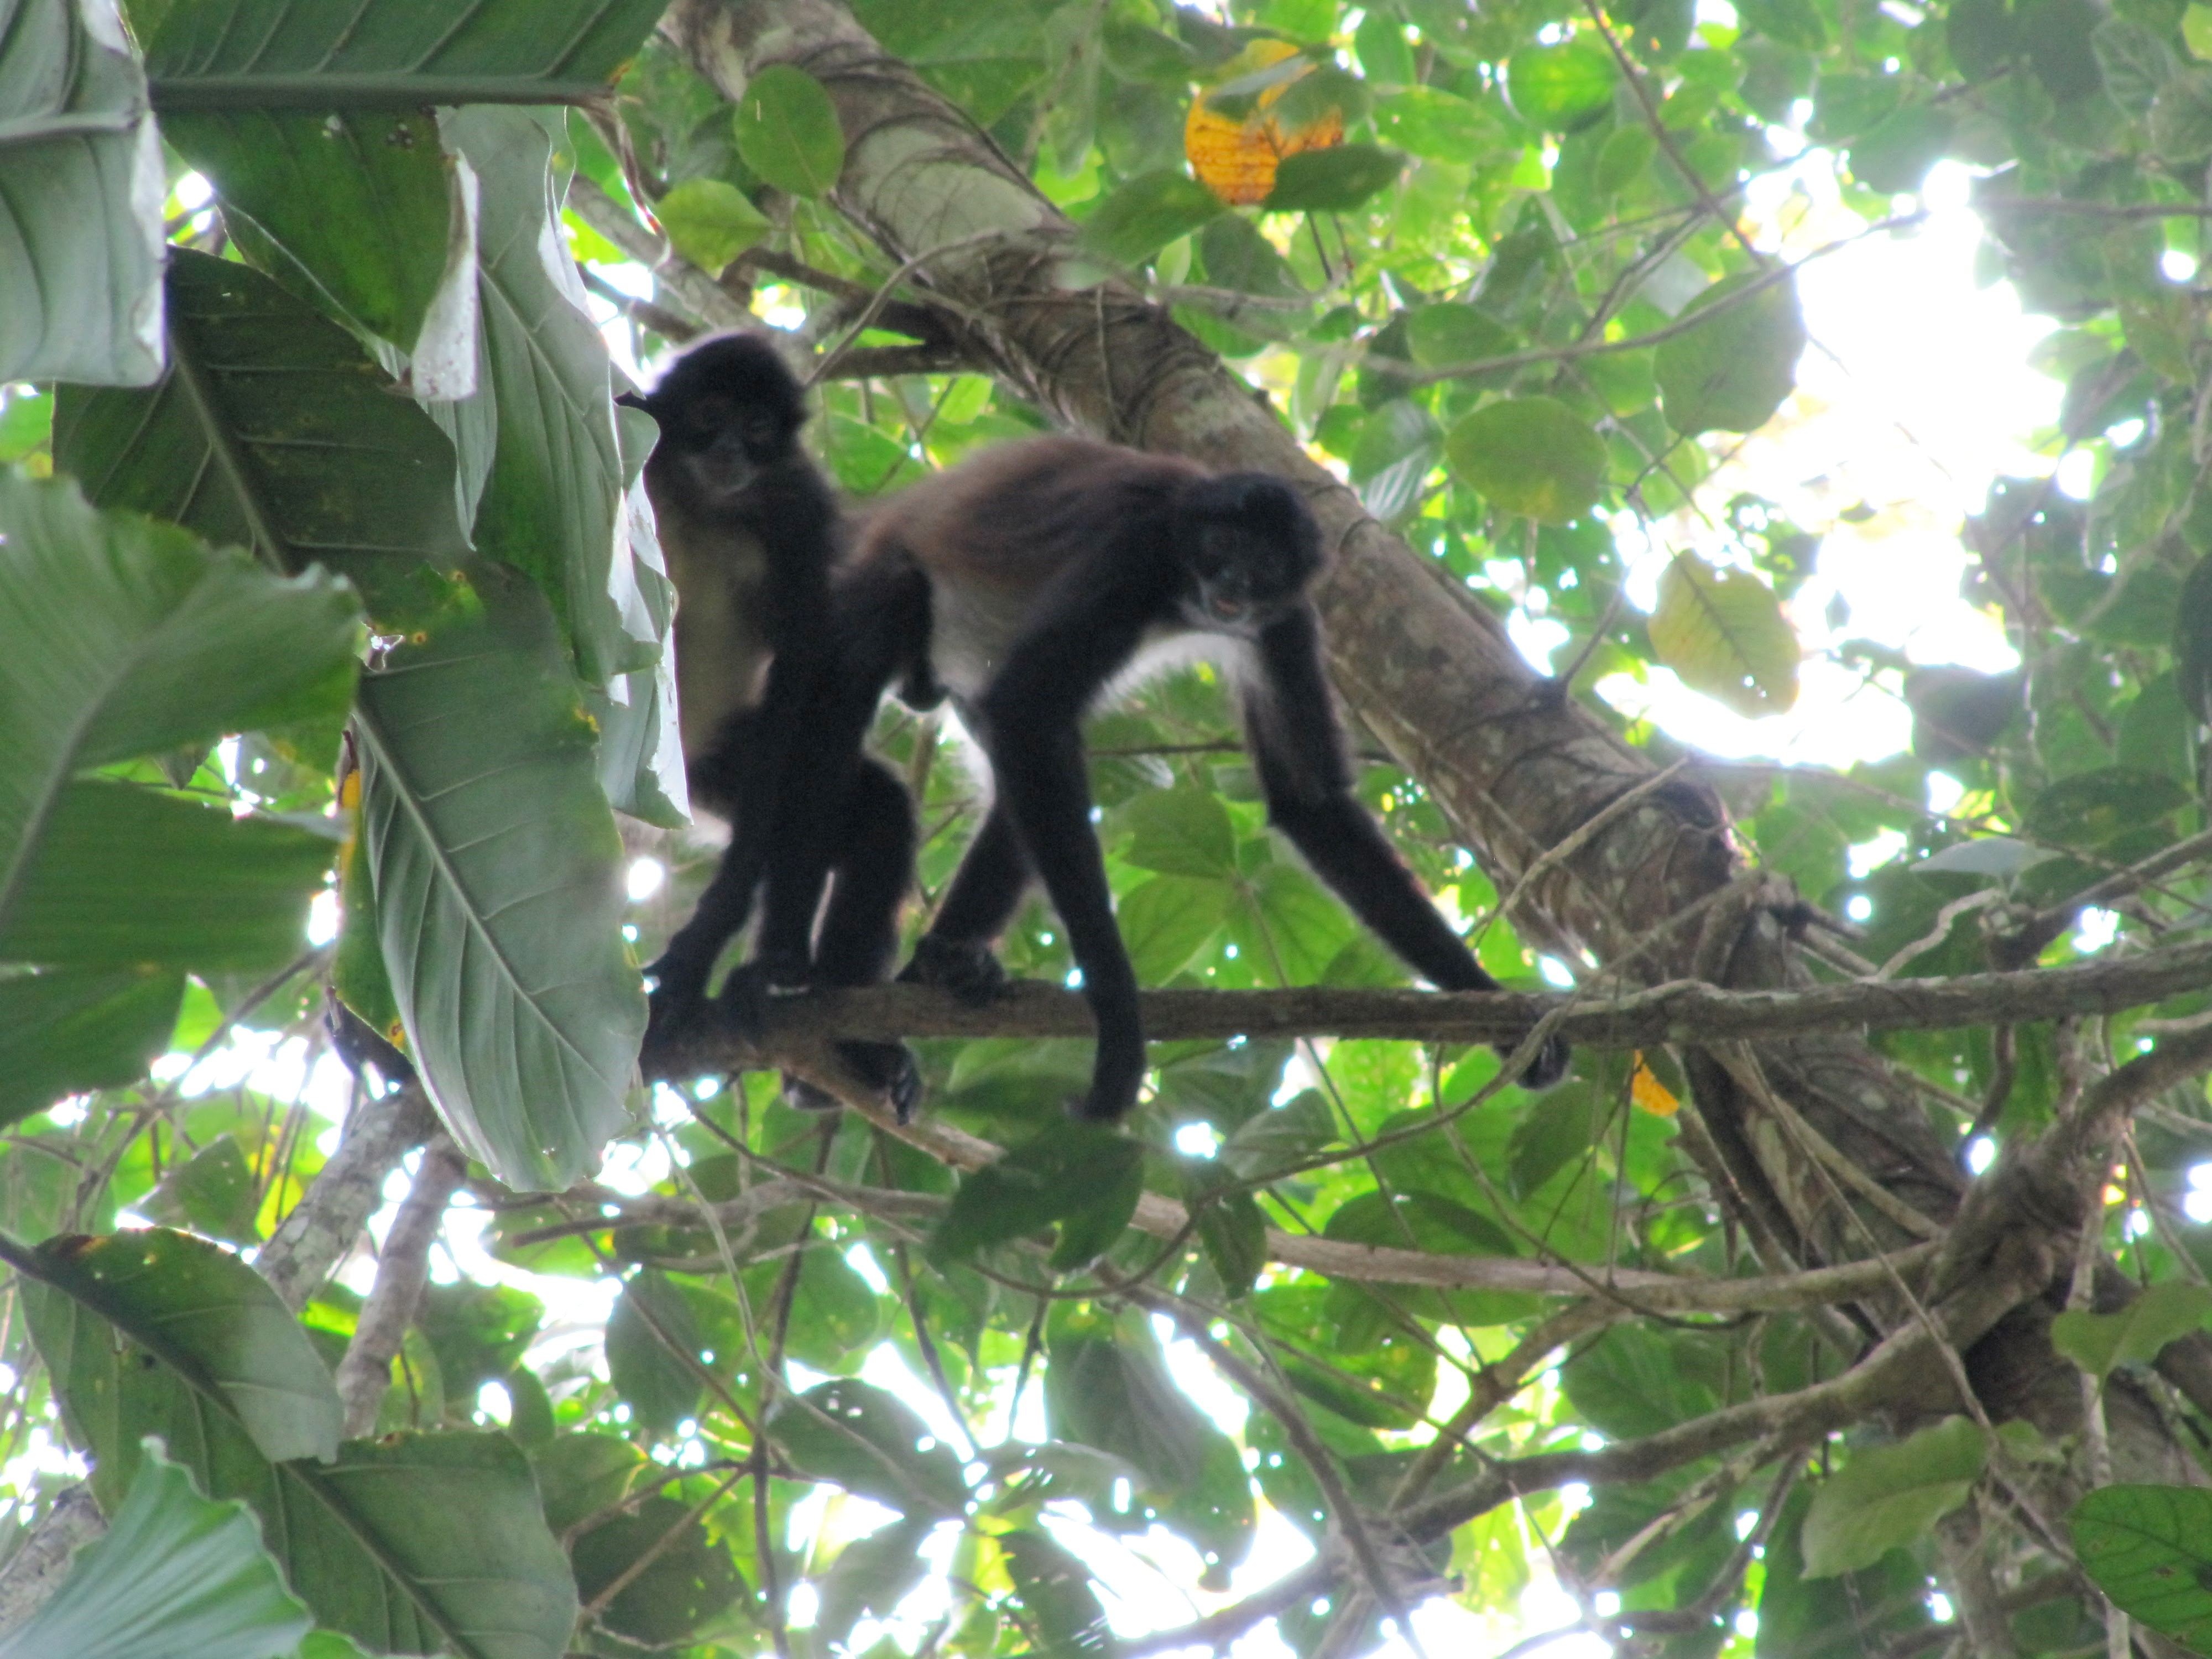 Two monkeys are high up in very lush trees. One is balanced on a thin branch, the other holds on to the first monkey's leg